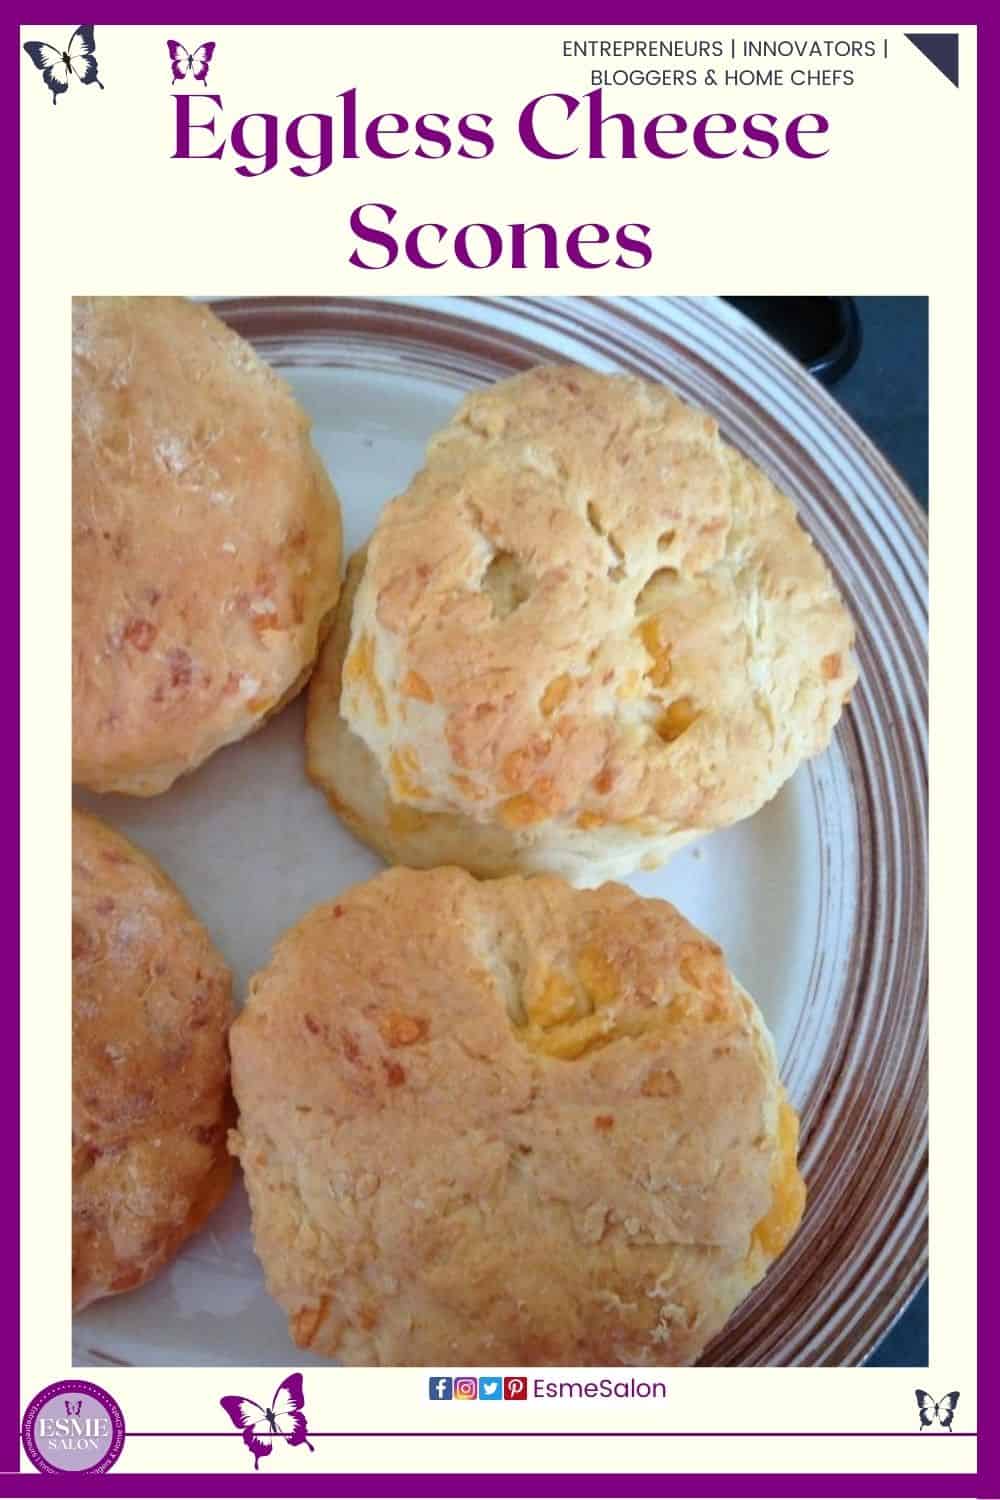 an image of 4 Eggless Cheese Scones on a silver plate